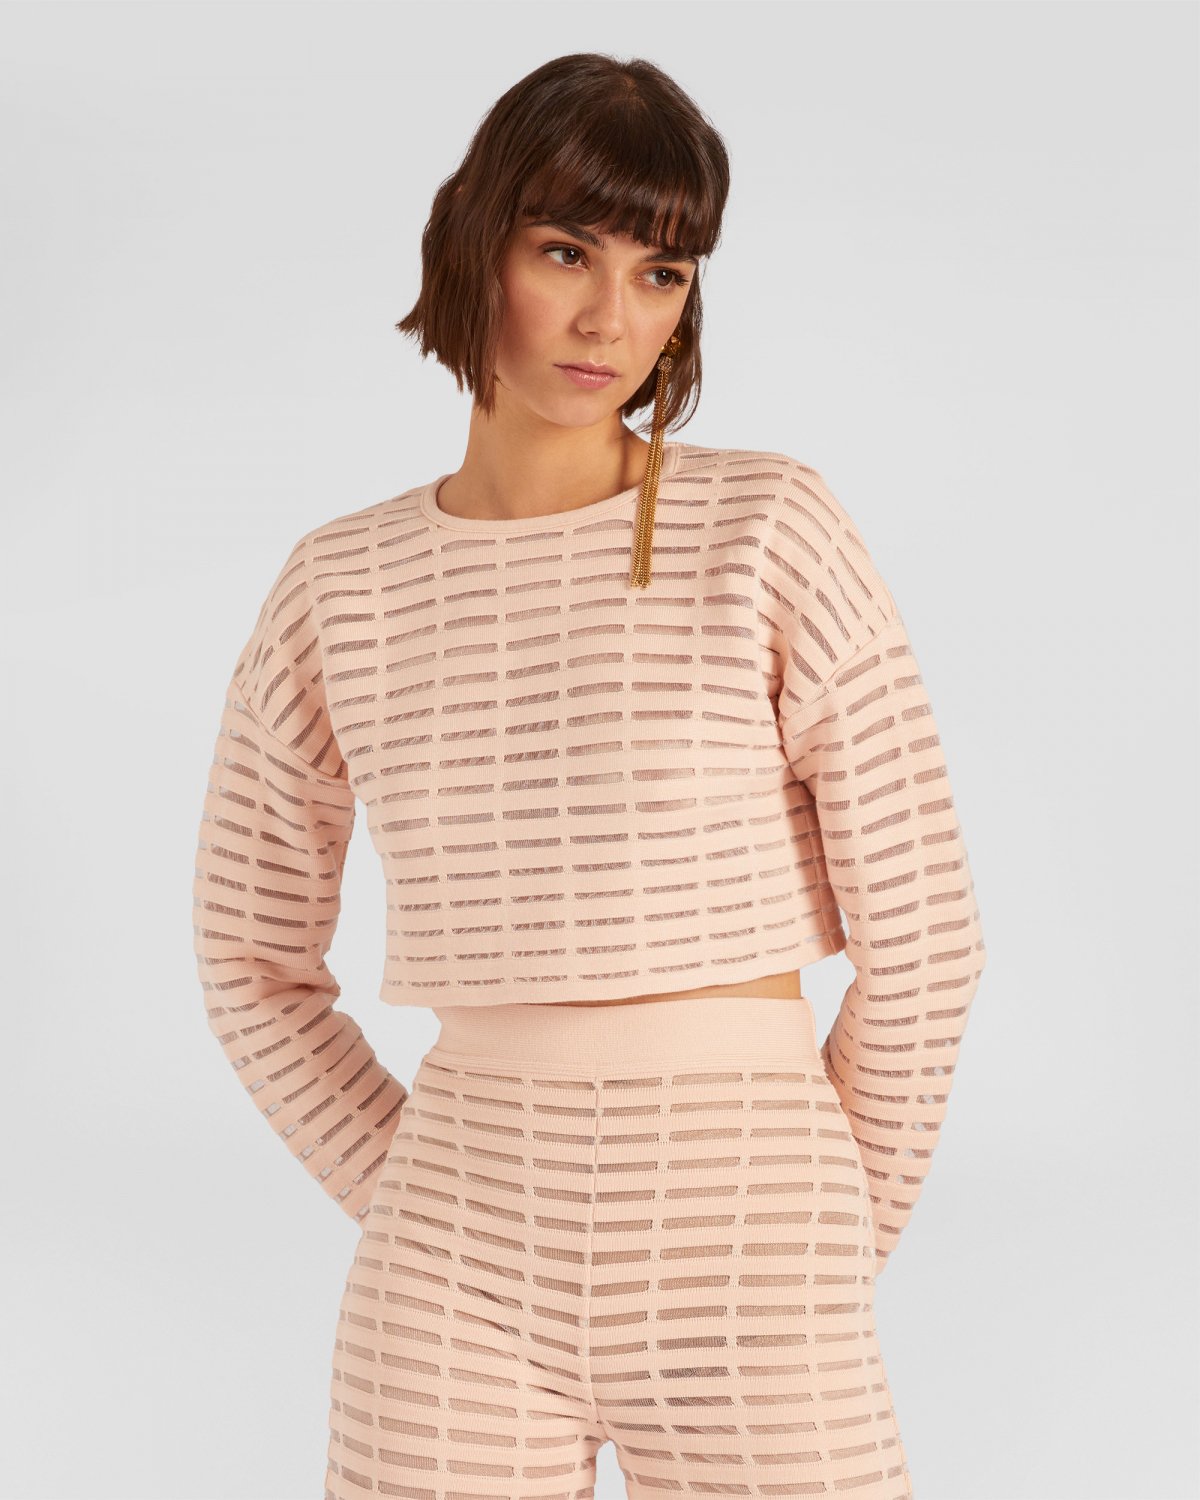 Iconic knit top | Fall Winter 2023-24, PRE-FALL Collection 2023, Tops & Blouses, Knitwear, Knitted tops, Crop tops, Crop tops | Genny